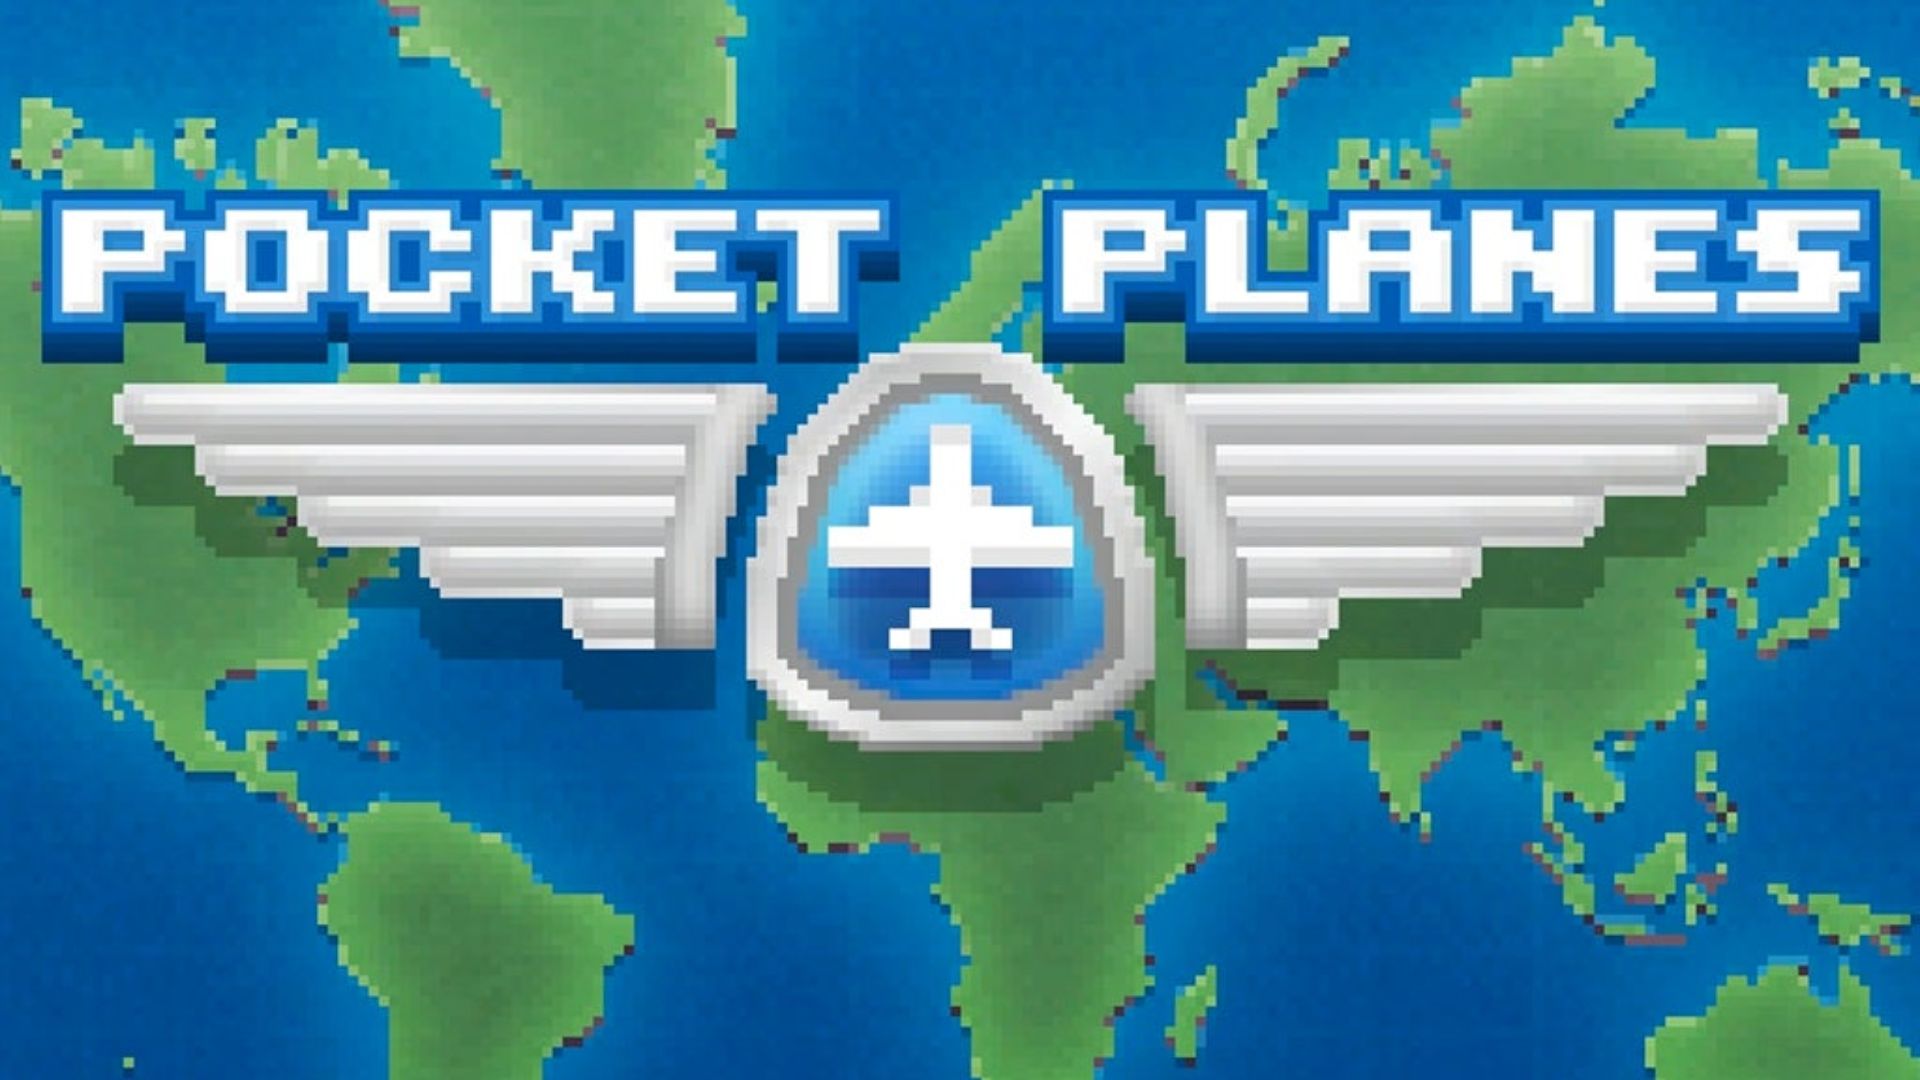 Pocket Plane Group - Contributions To The Gaming Community